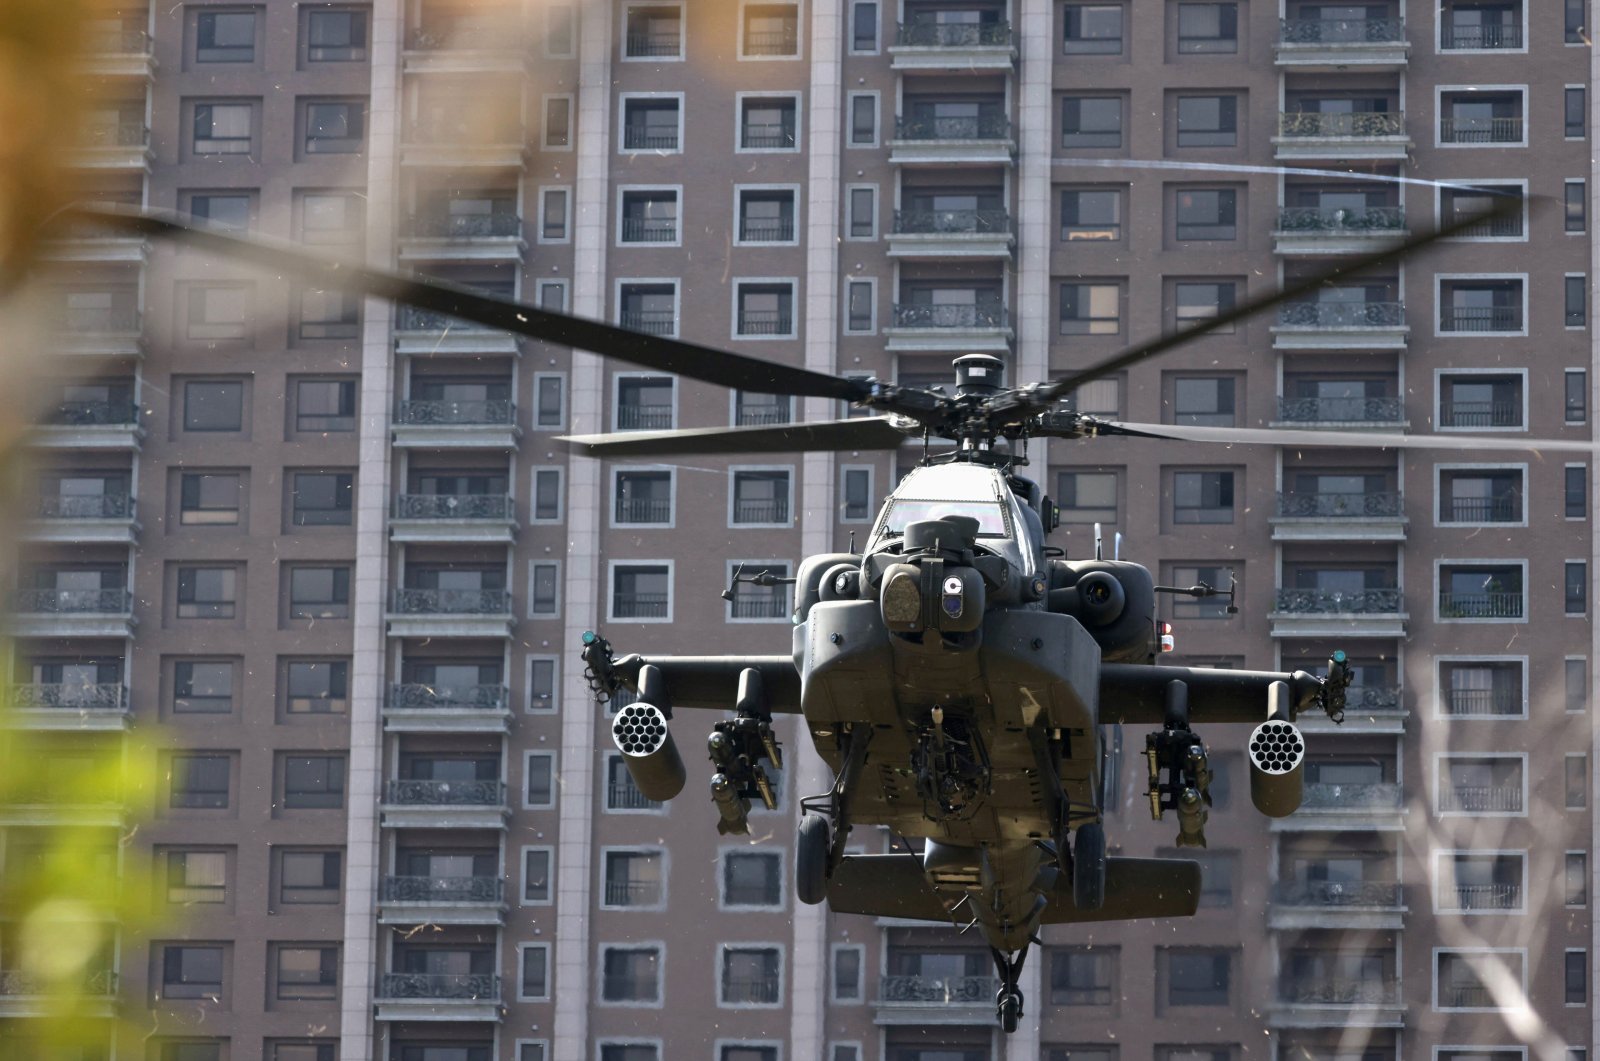 An AH-64E Apache attack helicopter lands during "Combat Readiness Week" drills in Hsinchu, Taiwan, Oct. 29, 2020. (Reuters File Photo)